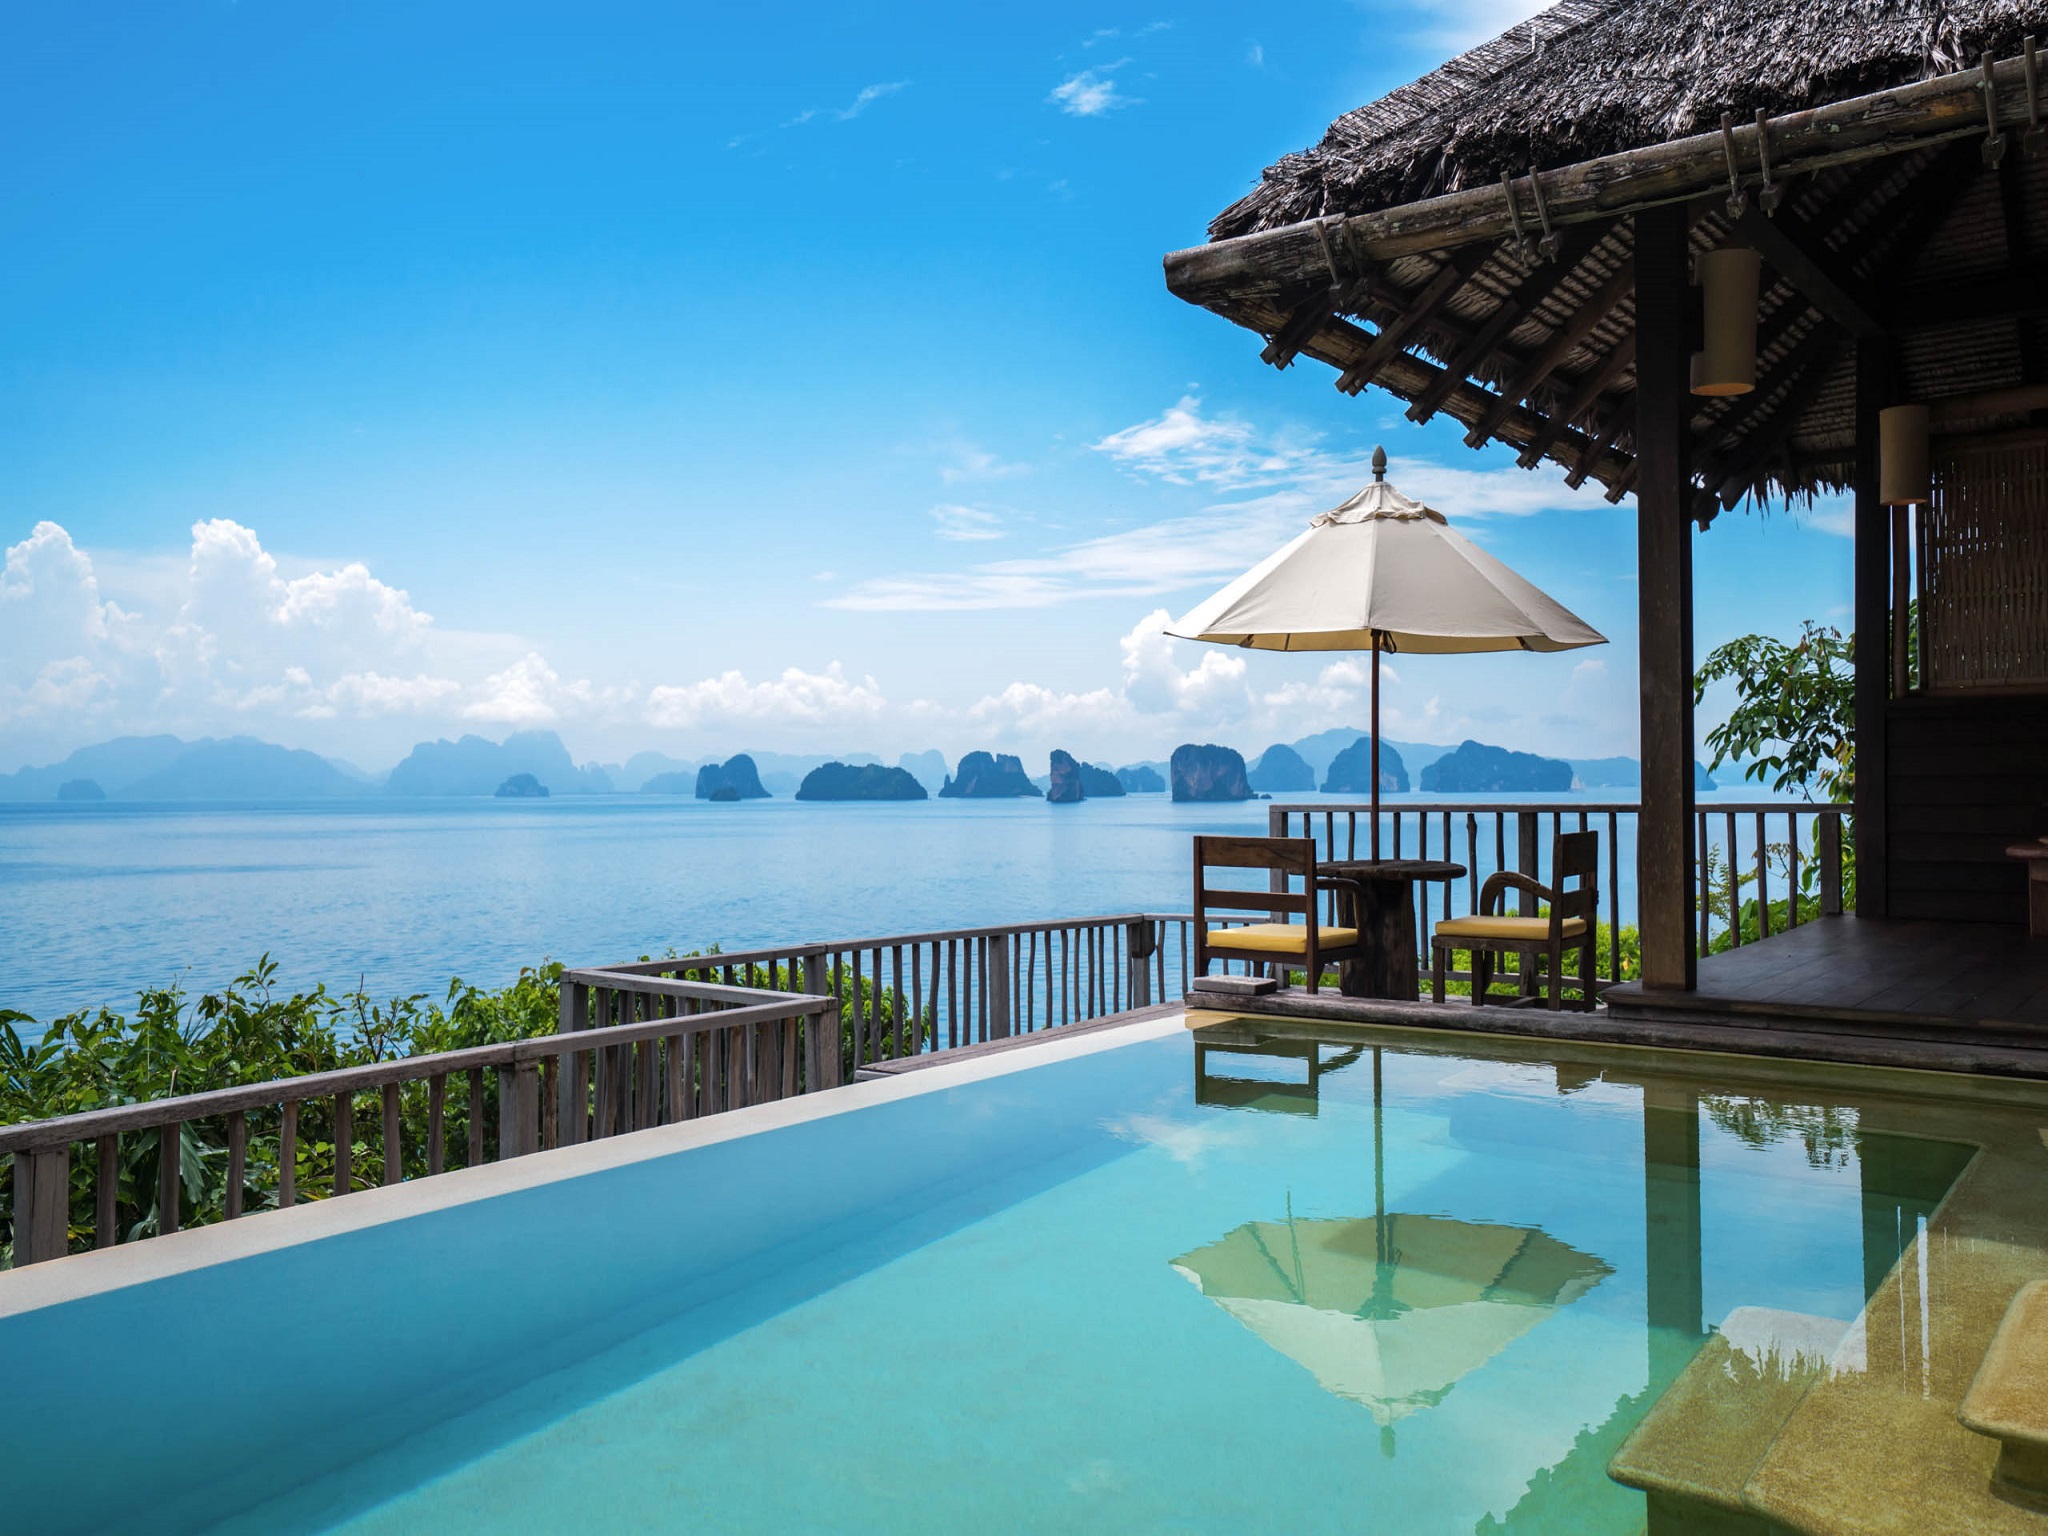 Six Senses Yao Noi - Where to stay in Thailand?